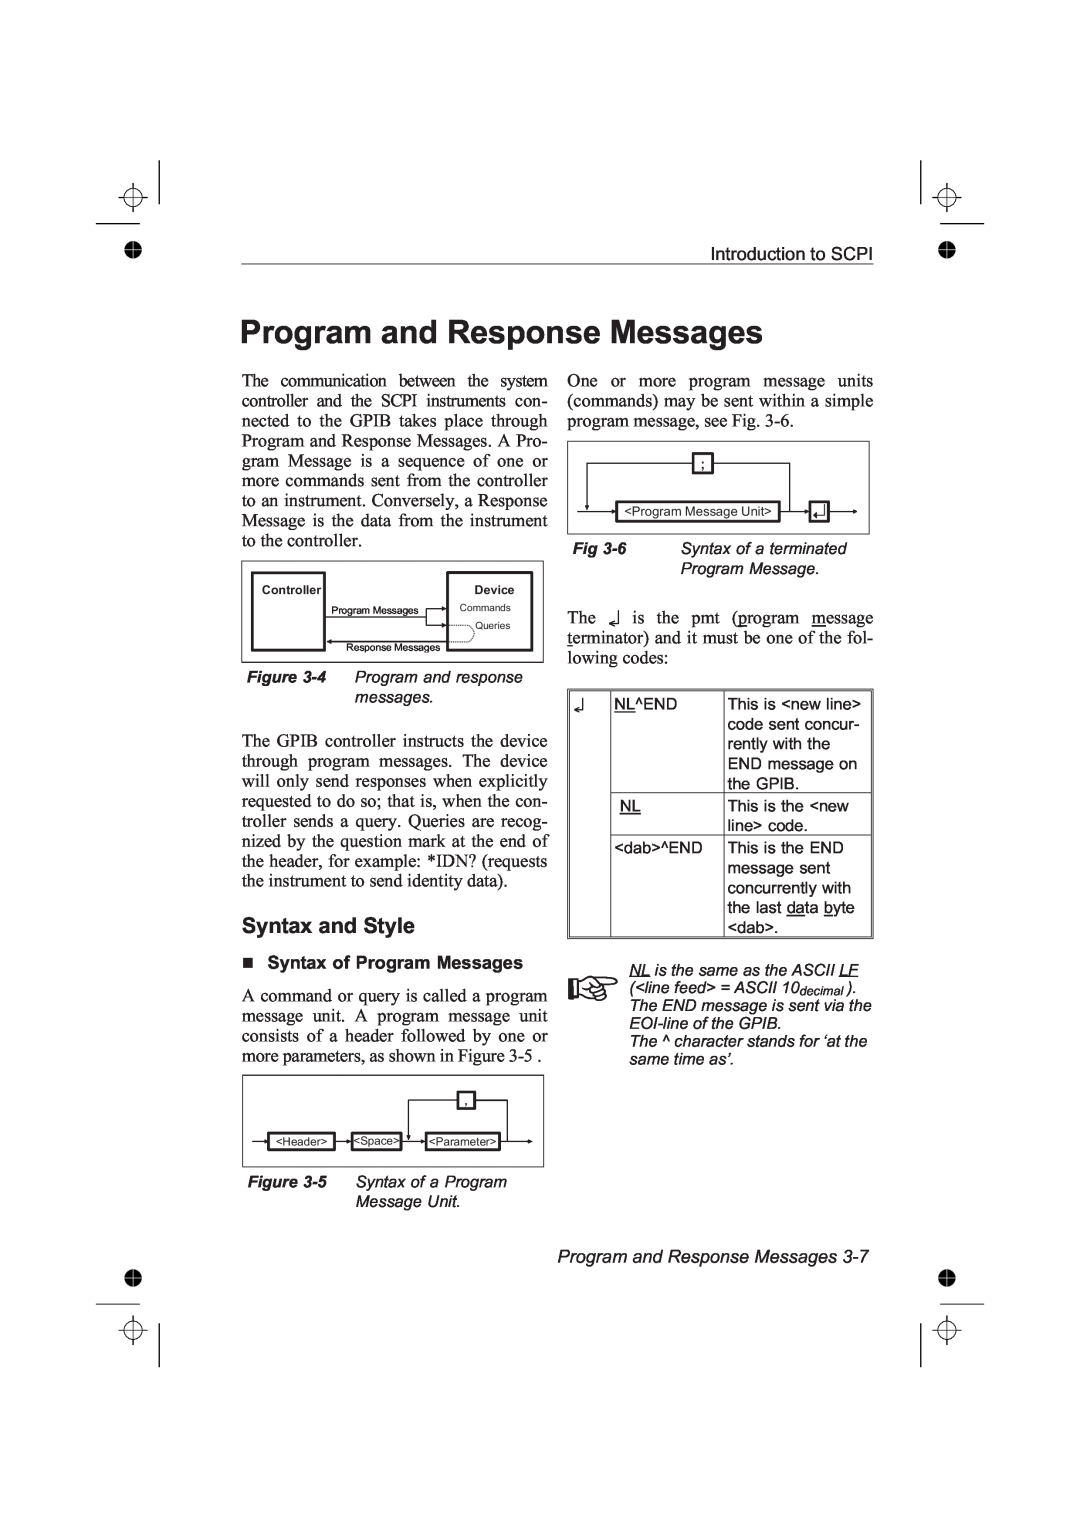 Fluke PM6681R, PM6685R manual Program and Response Messages, Syntax and Style, Syntax of Program Messages 